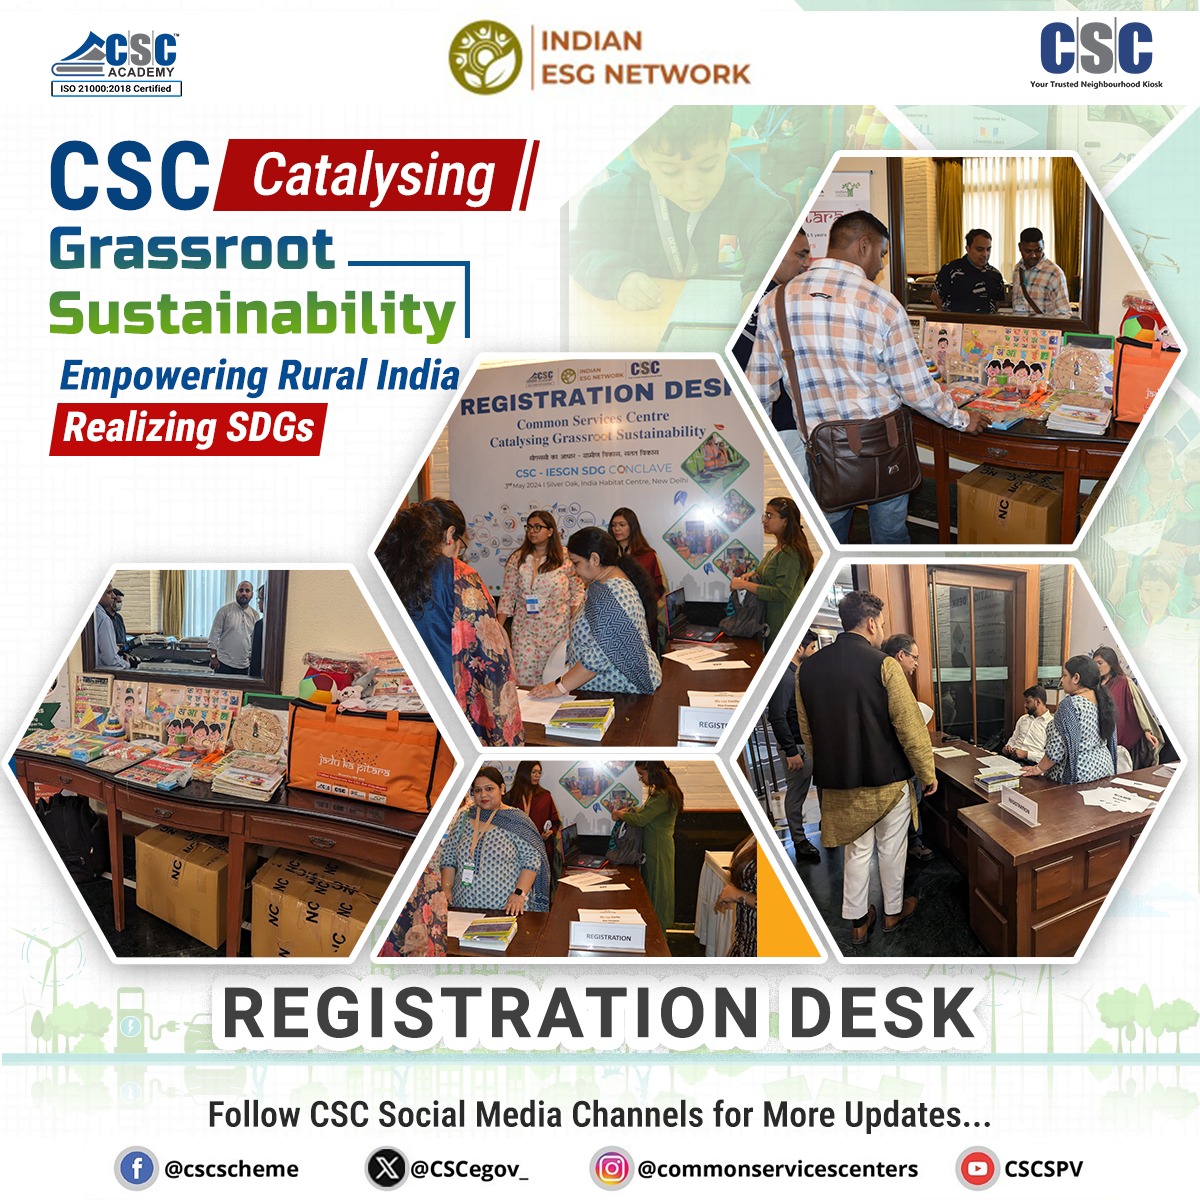 And the day has finally arrived! The excitement is at peak, as the registrations kickstart at 'CSC–IESGN SDG Conclave 2024'...

Follow #CSC Social Media Channels for more updates...

#SDGConclave2024 #SustainableDevelopmentGoals #SDGConclave #SustainableFuture @IndESGNetwork